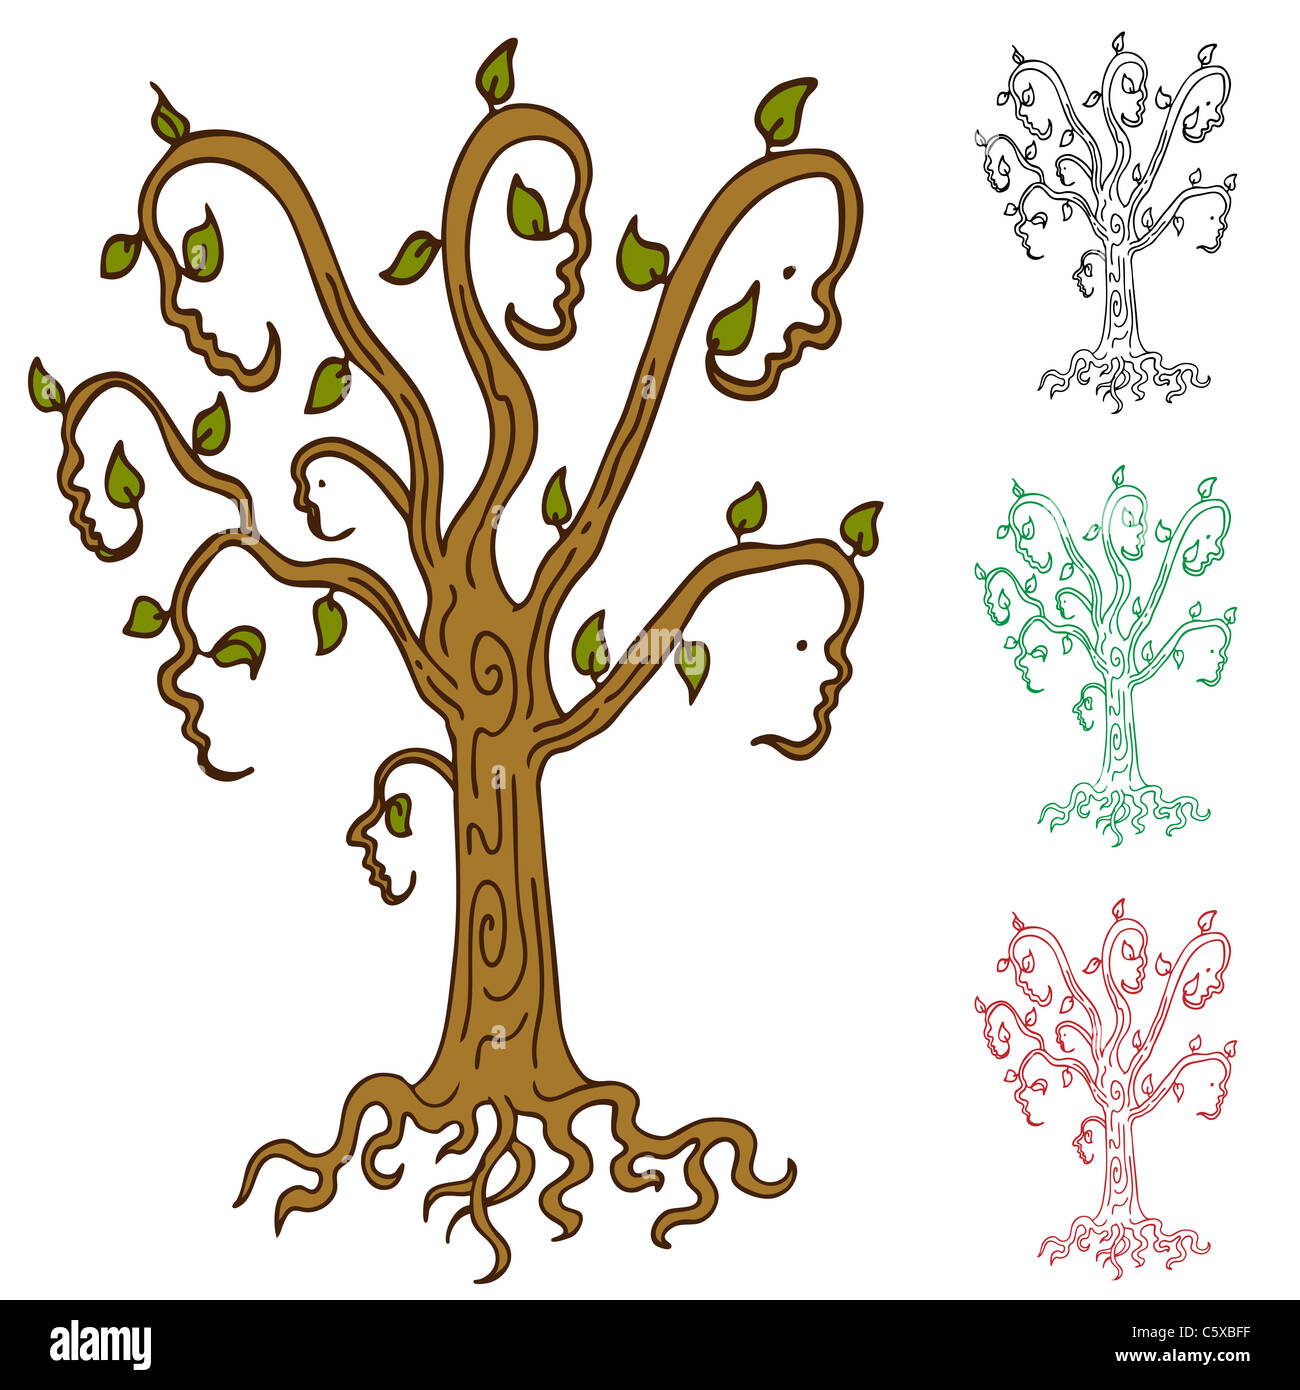 Notebook design abstract family tree with roots Vector Image